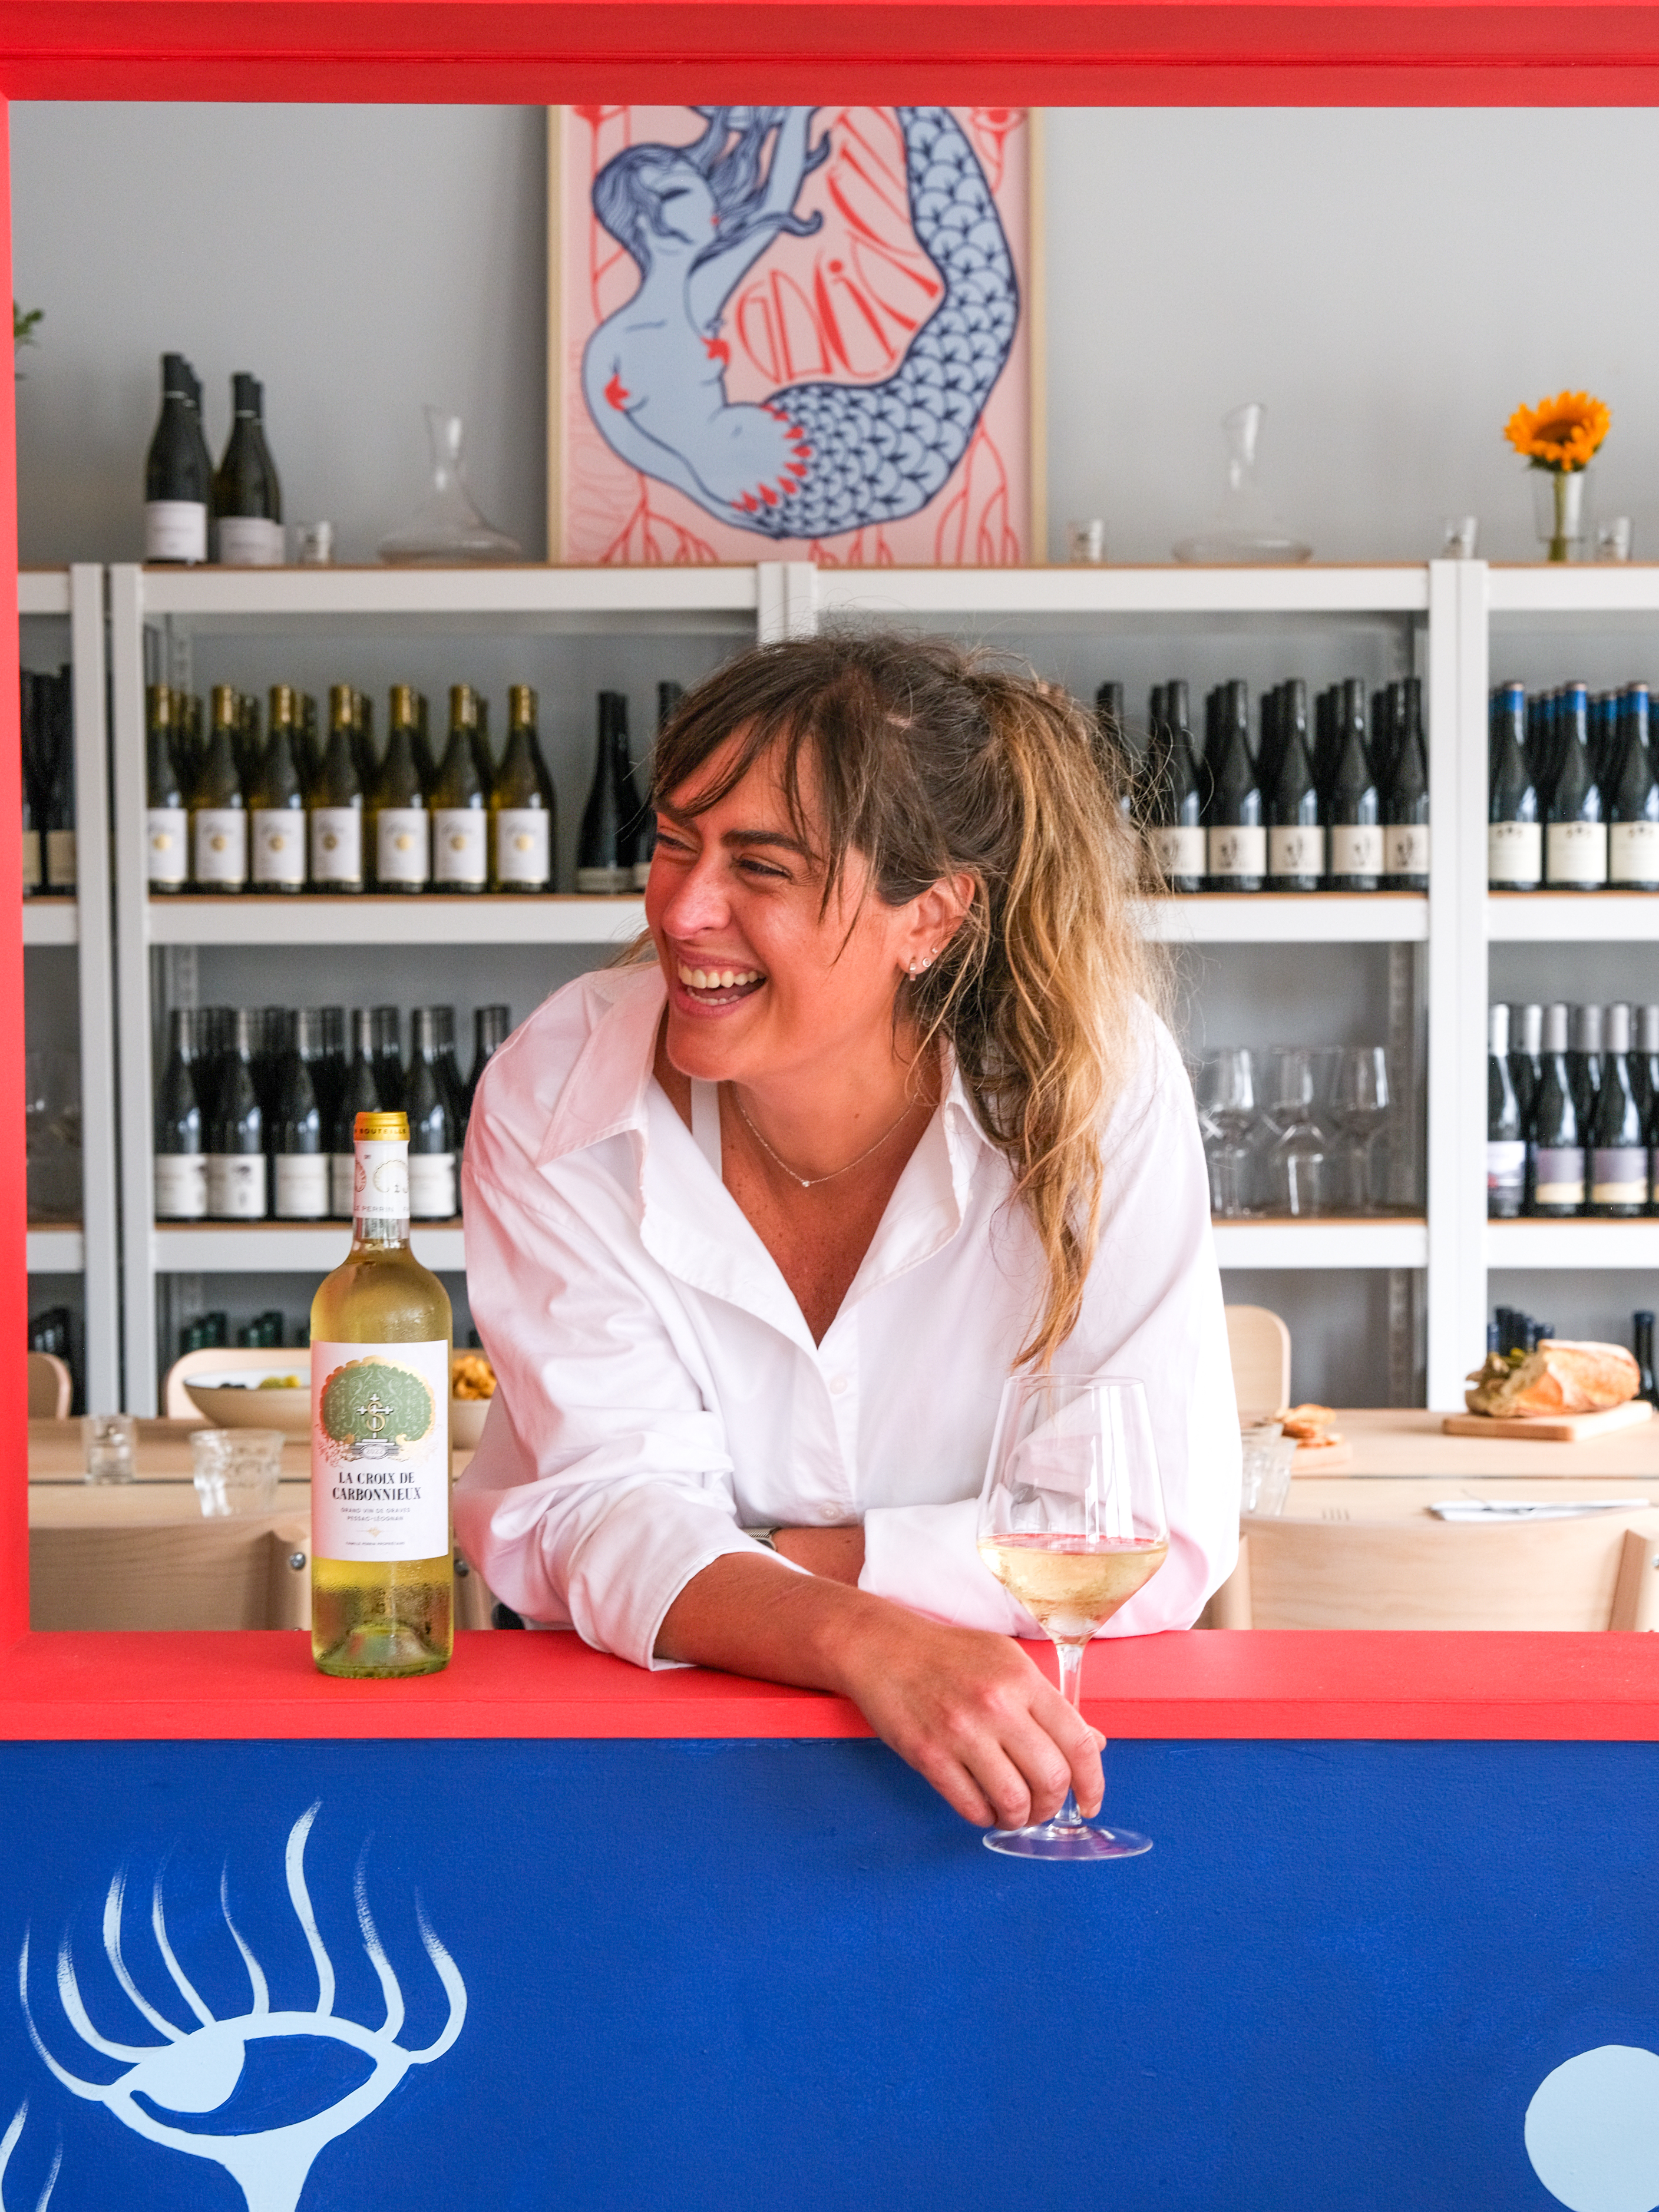 A smiling woman in a white shirt holds a glass of white wine, leaning on a counter with a blue and red backdrop. Shelves of wine bottles and a mermaid painting are behind her.